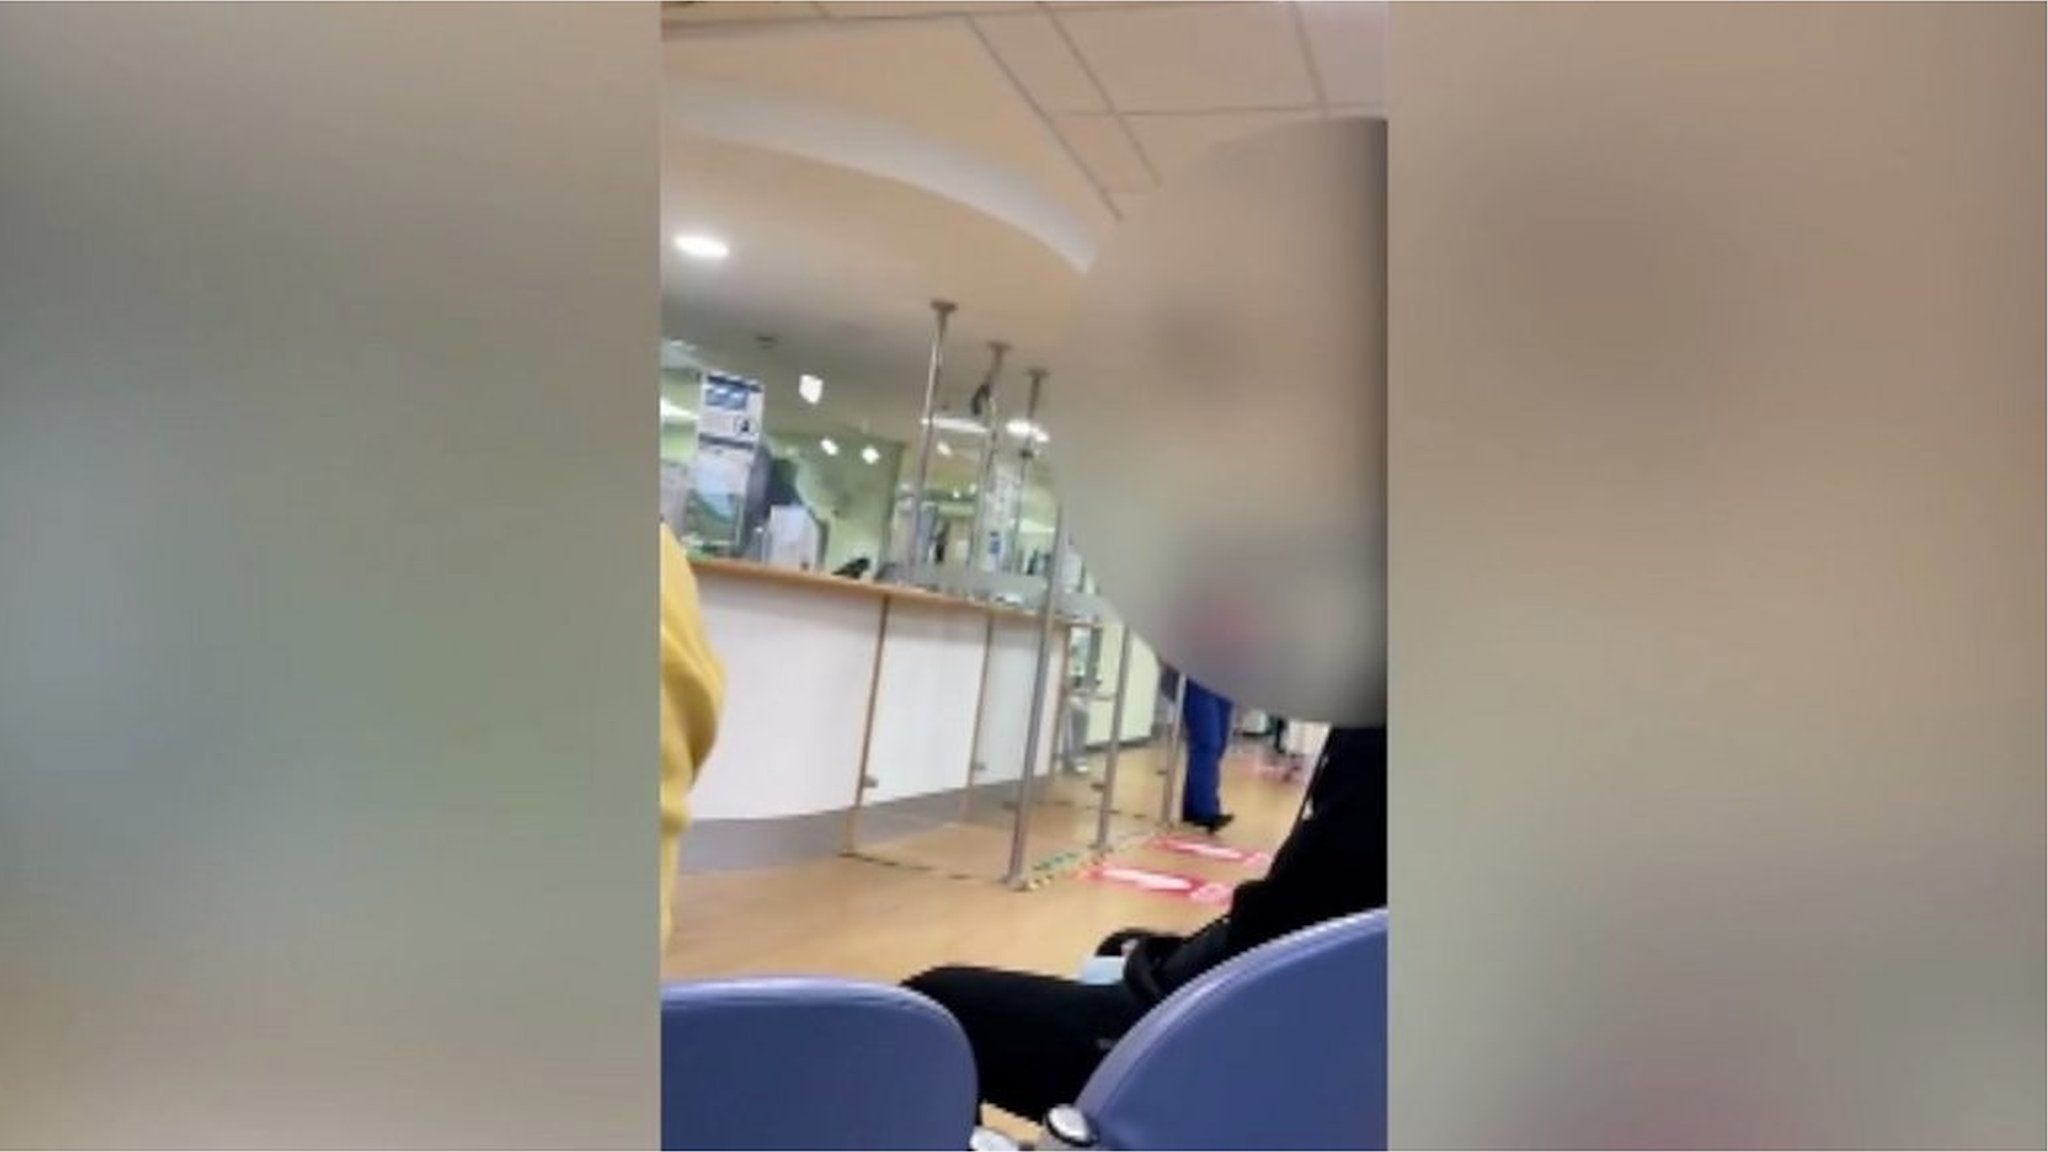 A nurse is filmed as she informs a packed accident and emergency waiting room of long delays.